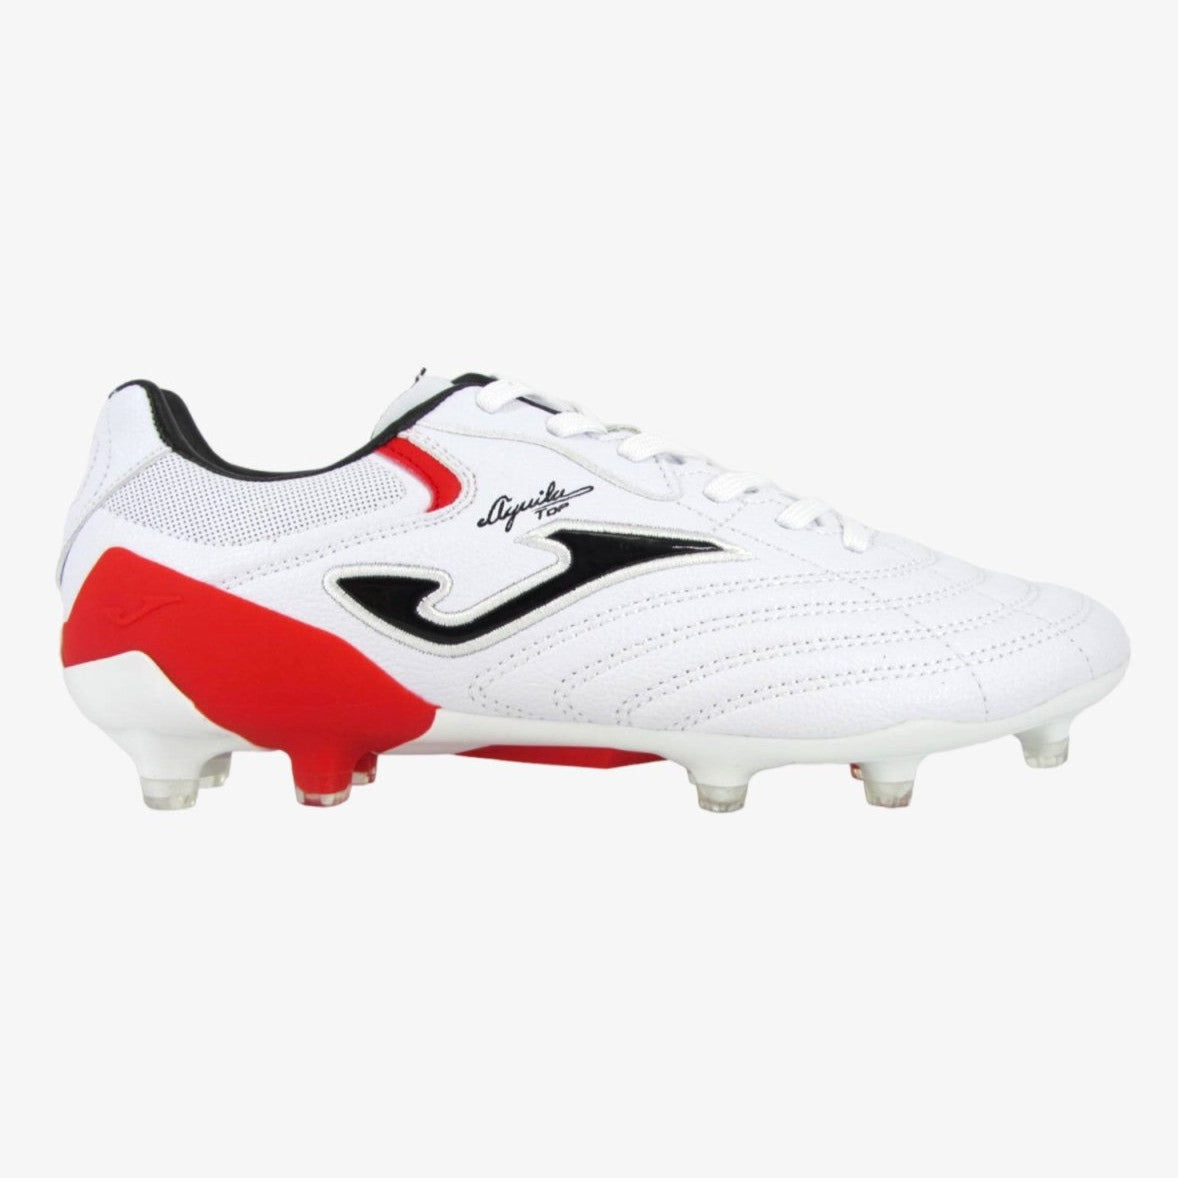 Joma Aguila Cup 2302 Firm Ground Soccer Cleats